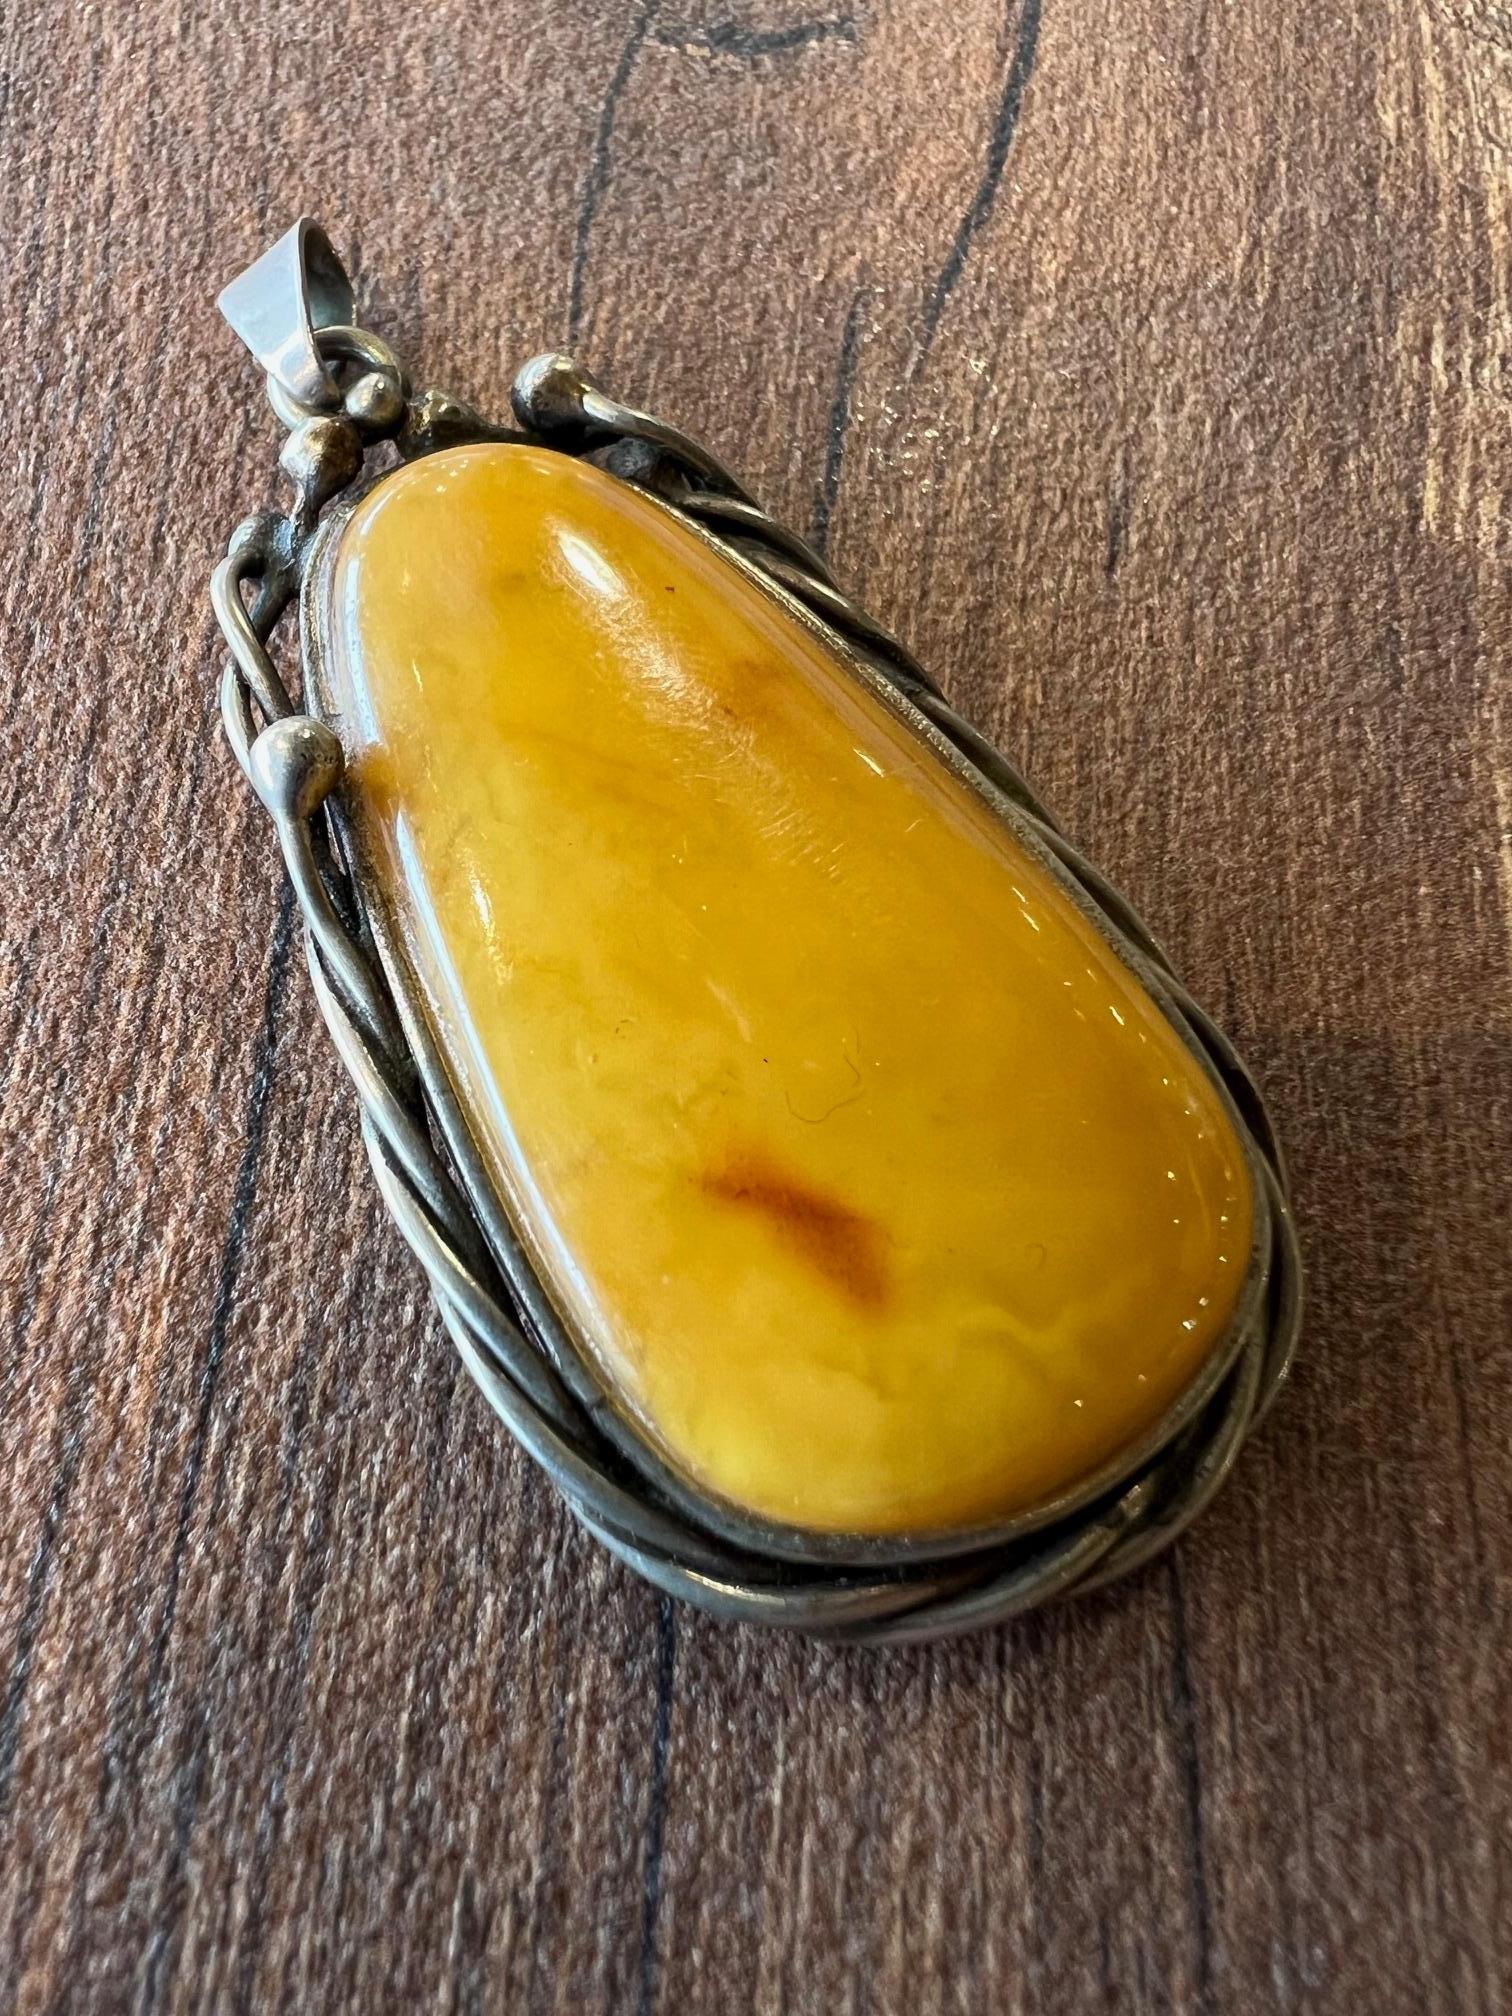 Authentic Baltic Amber Pendant

Baltic amber is 34-48 million years old (Seyfullah et al. 2018), having been deposited during the Lutetian stage of the Middle Eocene. The main deposits of Baltic amber are on the southern shores of the Baltic